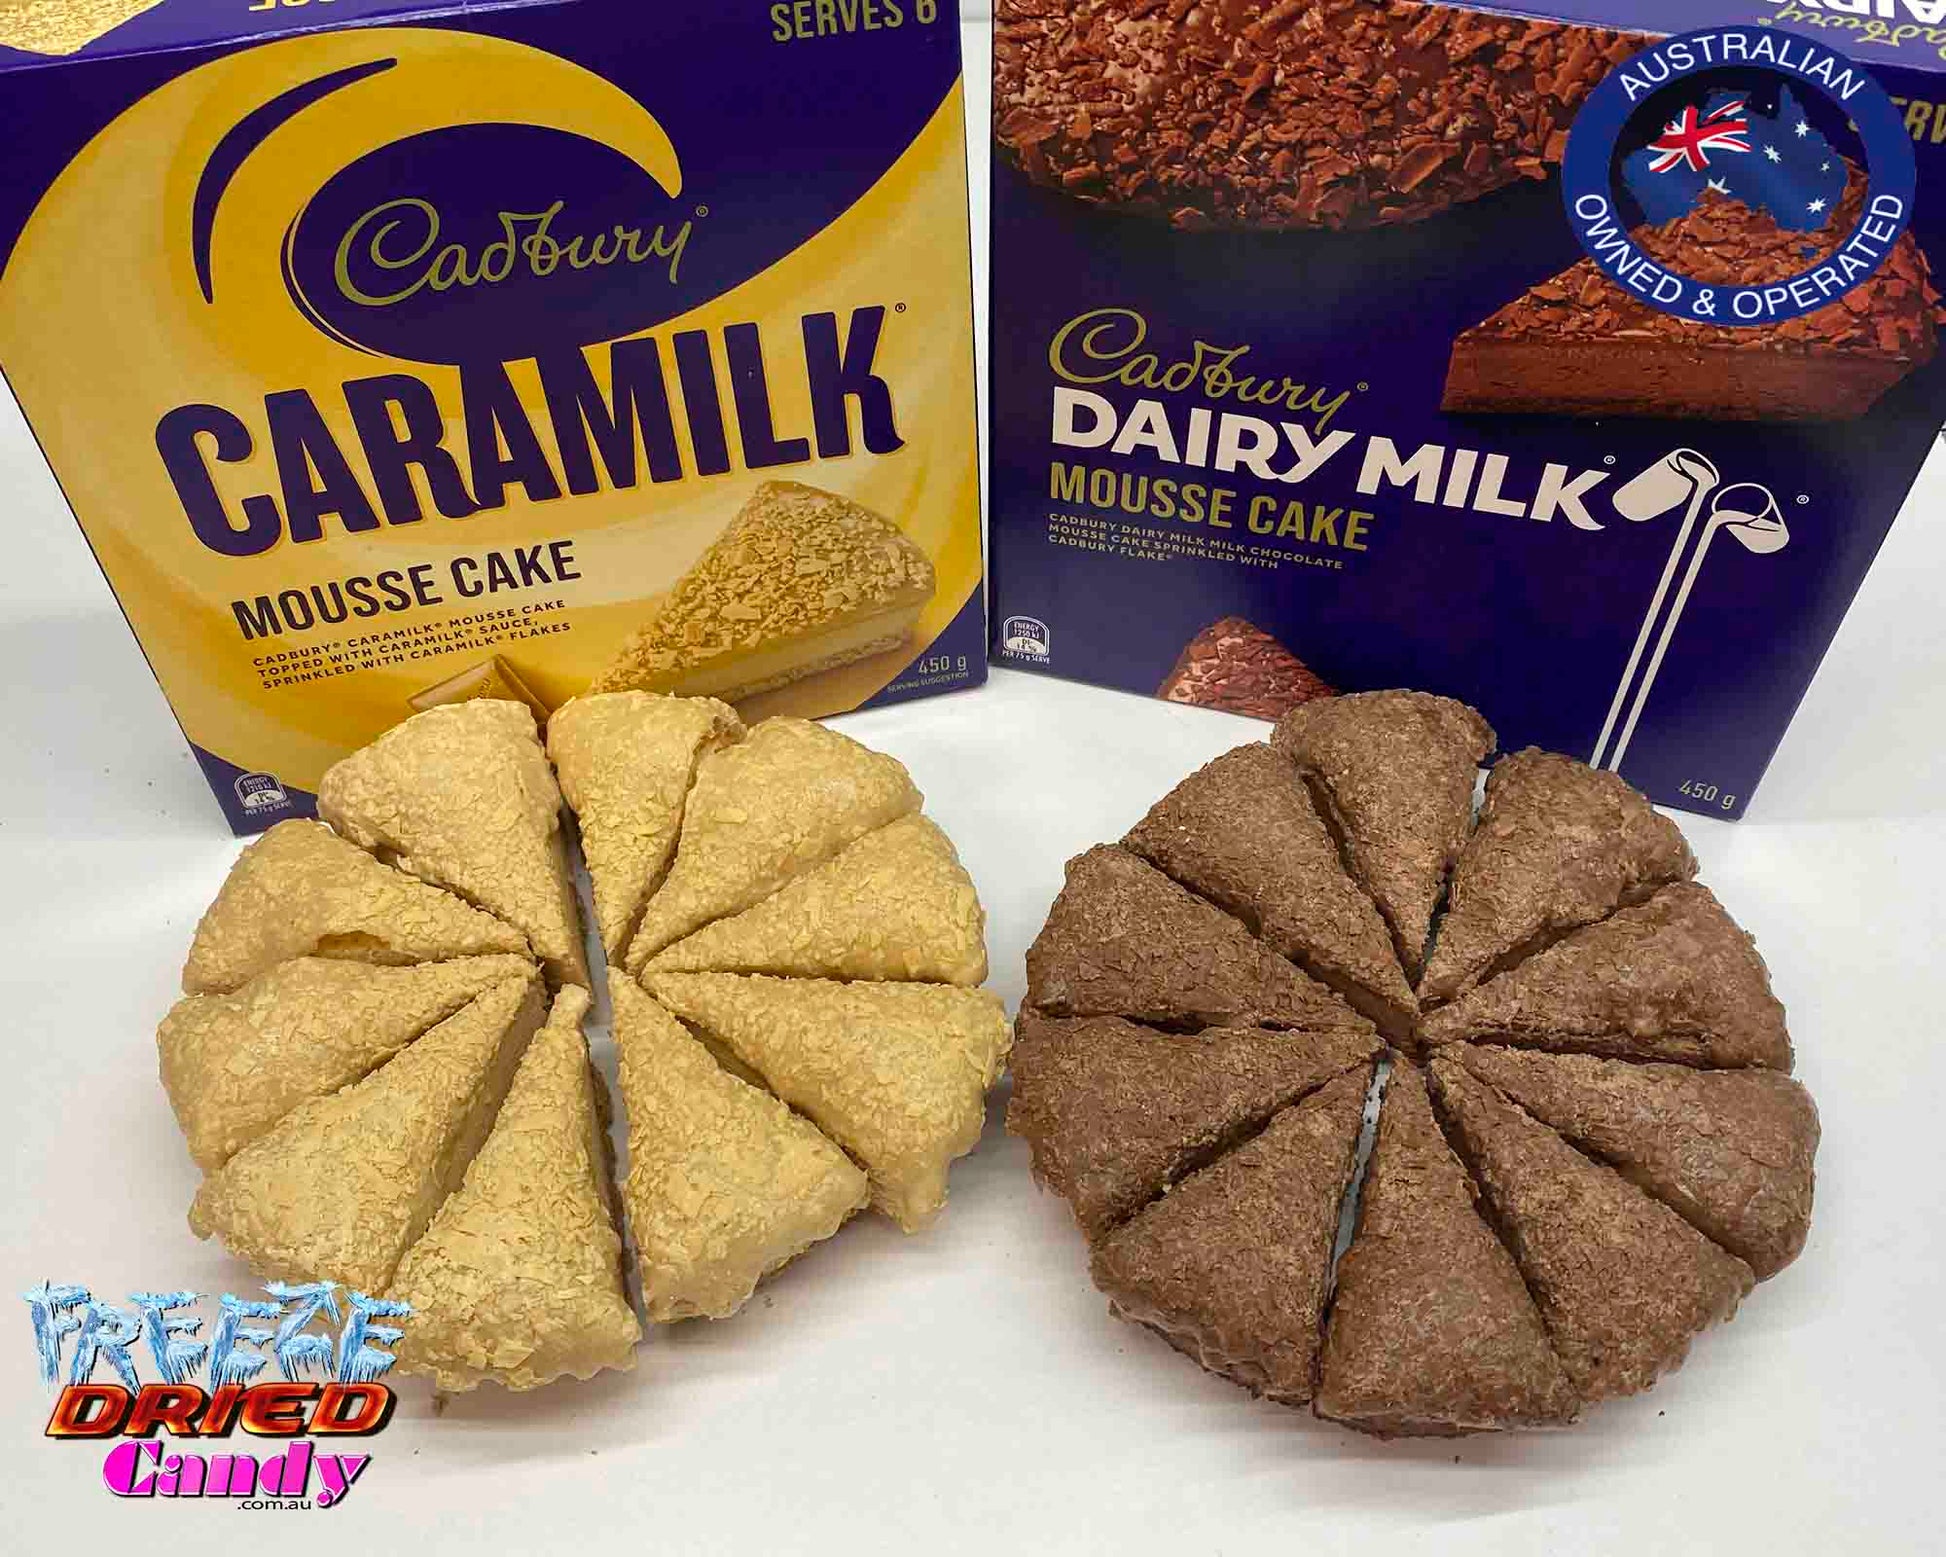 Freeze Dried Dairy Milk & Caramilk Mousse Cake - Cadbury- Freeze Dried Candy Lollies | Australia. Once Freeze Dried and all the moisture has been removed, Dairy Milk Mousse cake turns into a super crunchy decadent treat.  To die for..!!   Proving you can never have too much Dairy Milk, this delicious creation features a Dairy Milk mousse layer, topped with Dairy Milk sauce, sprinkled Dairy Milk pieces and, of course, you've got a scrumptious biscuit base as the foundation.